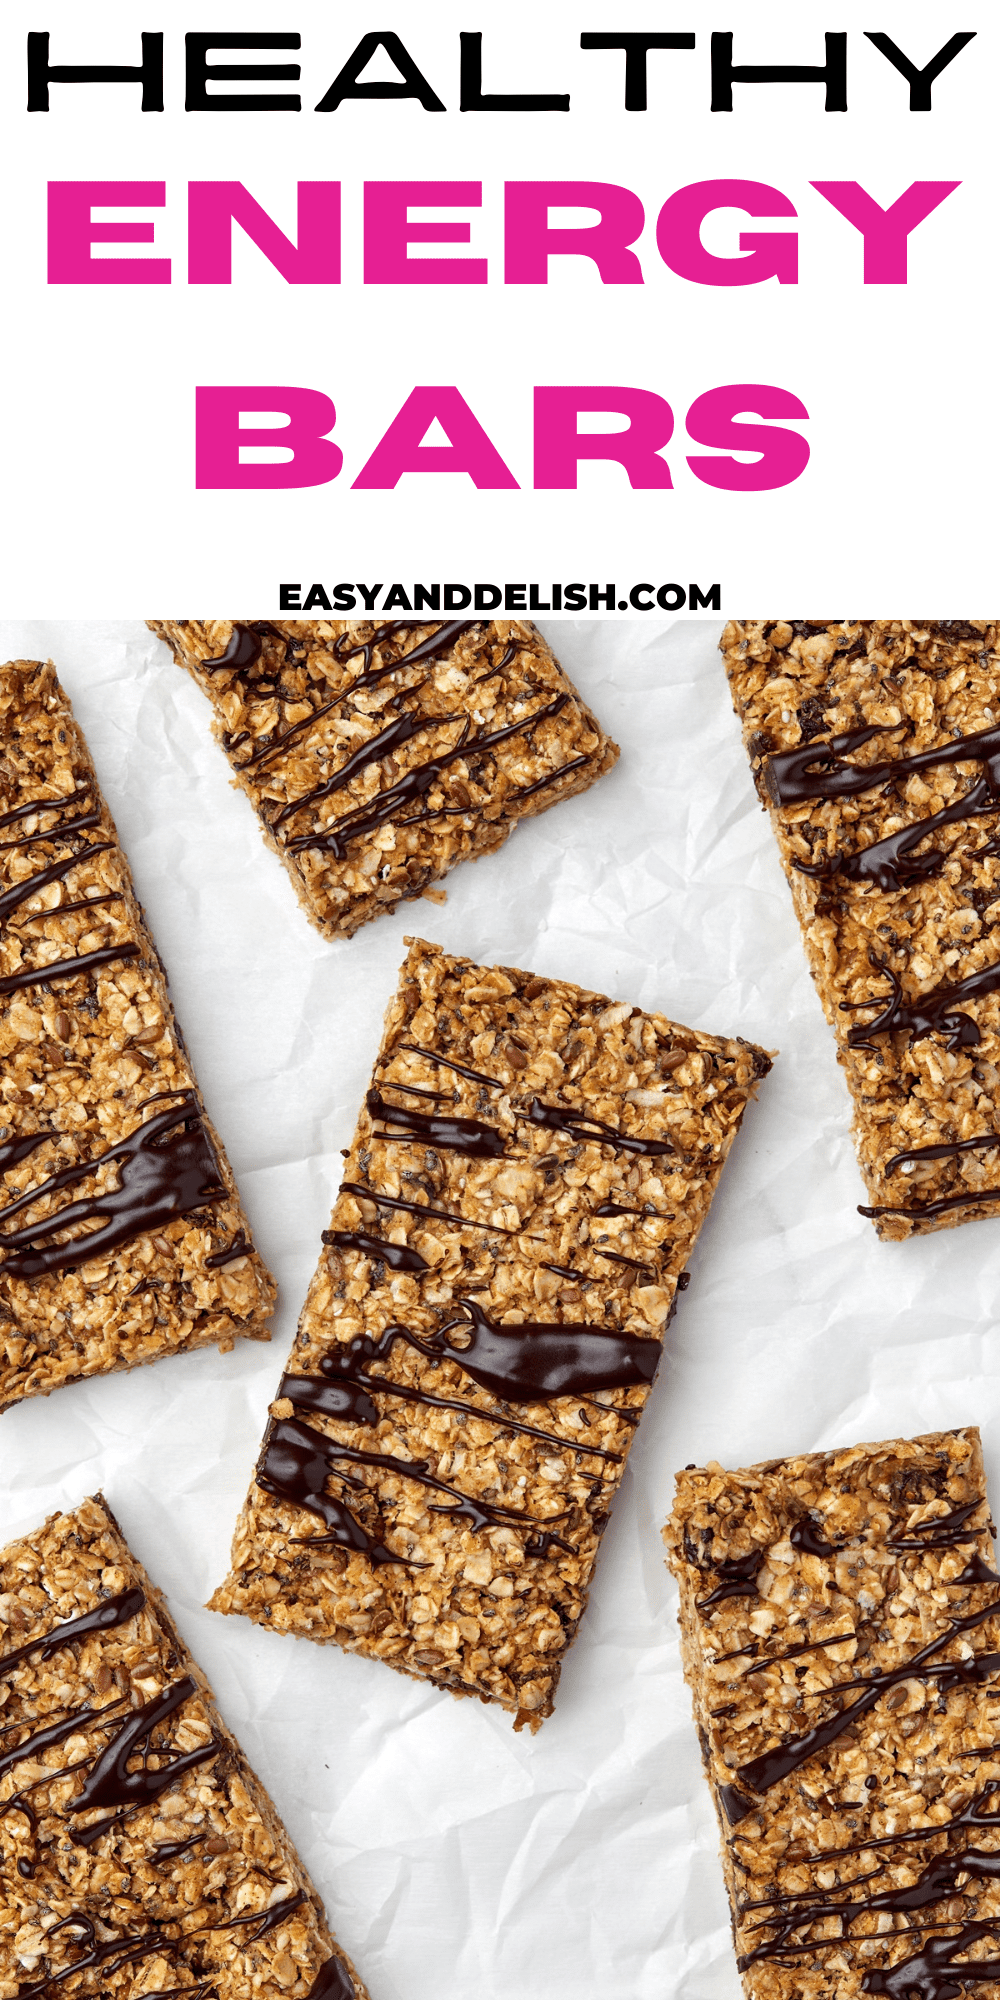 several healthy homemade energy bars spread over a table.